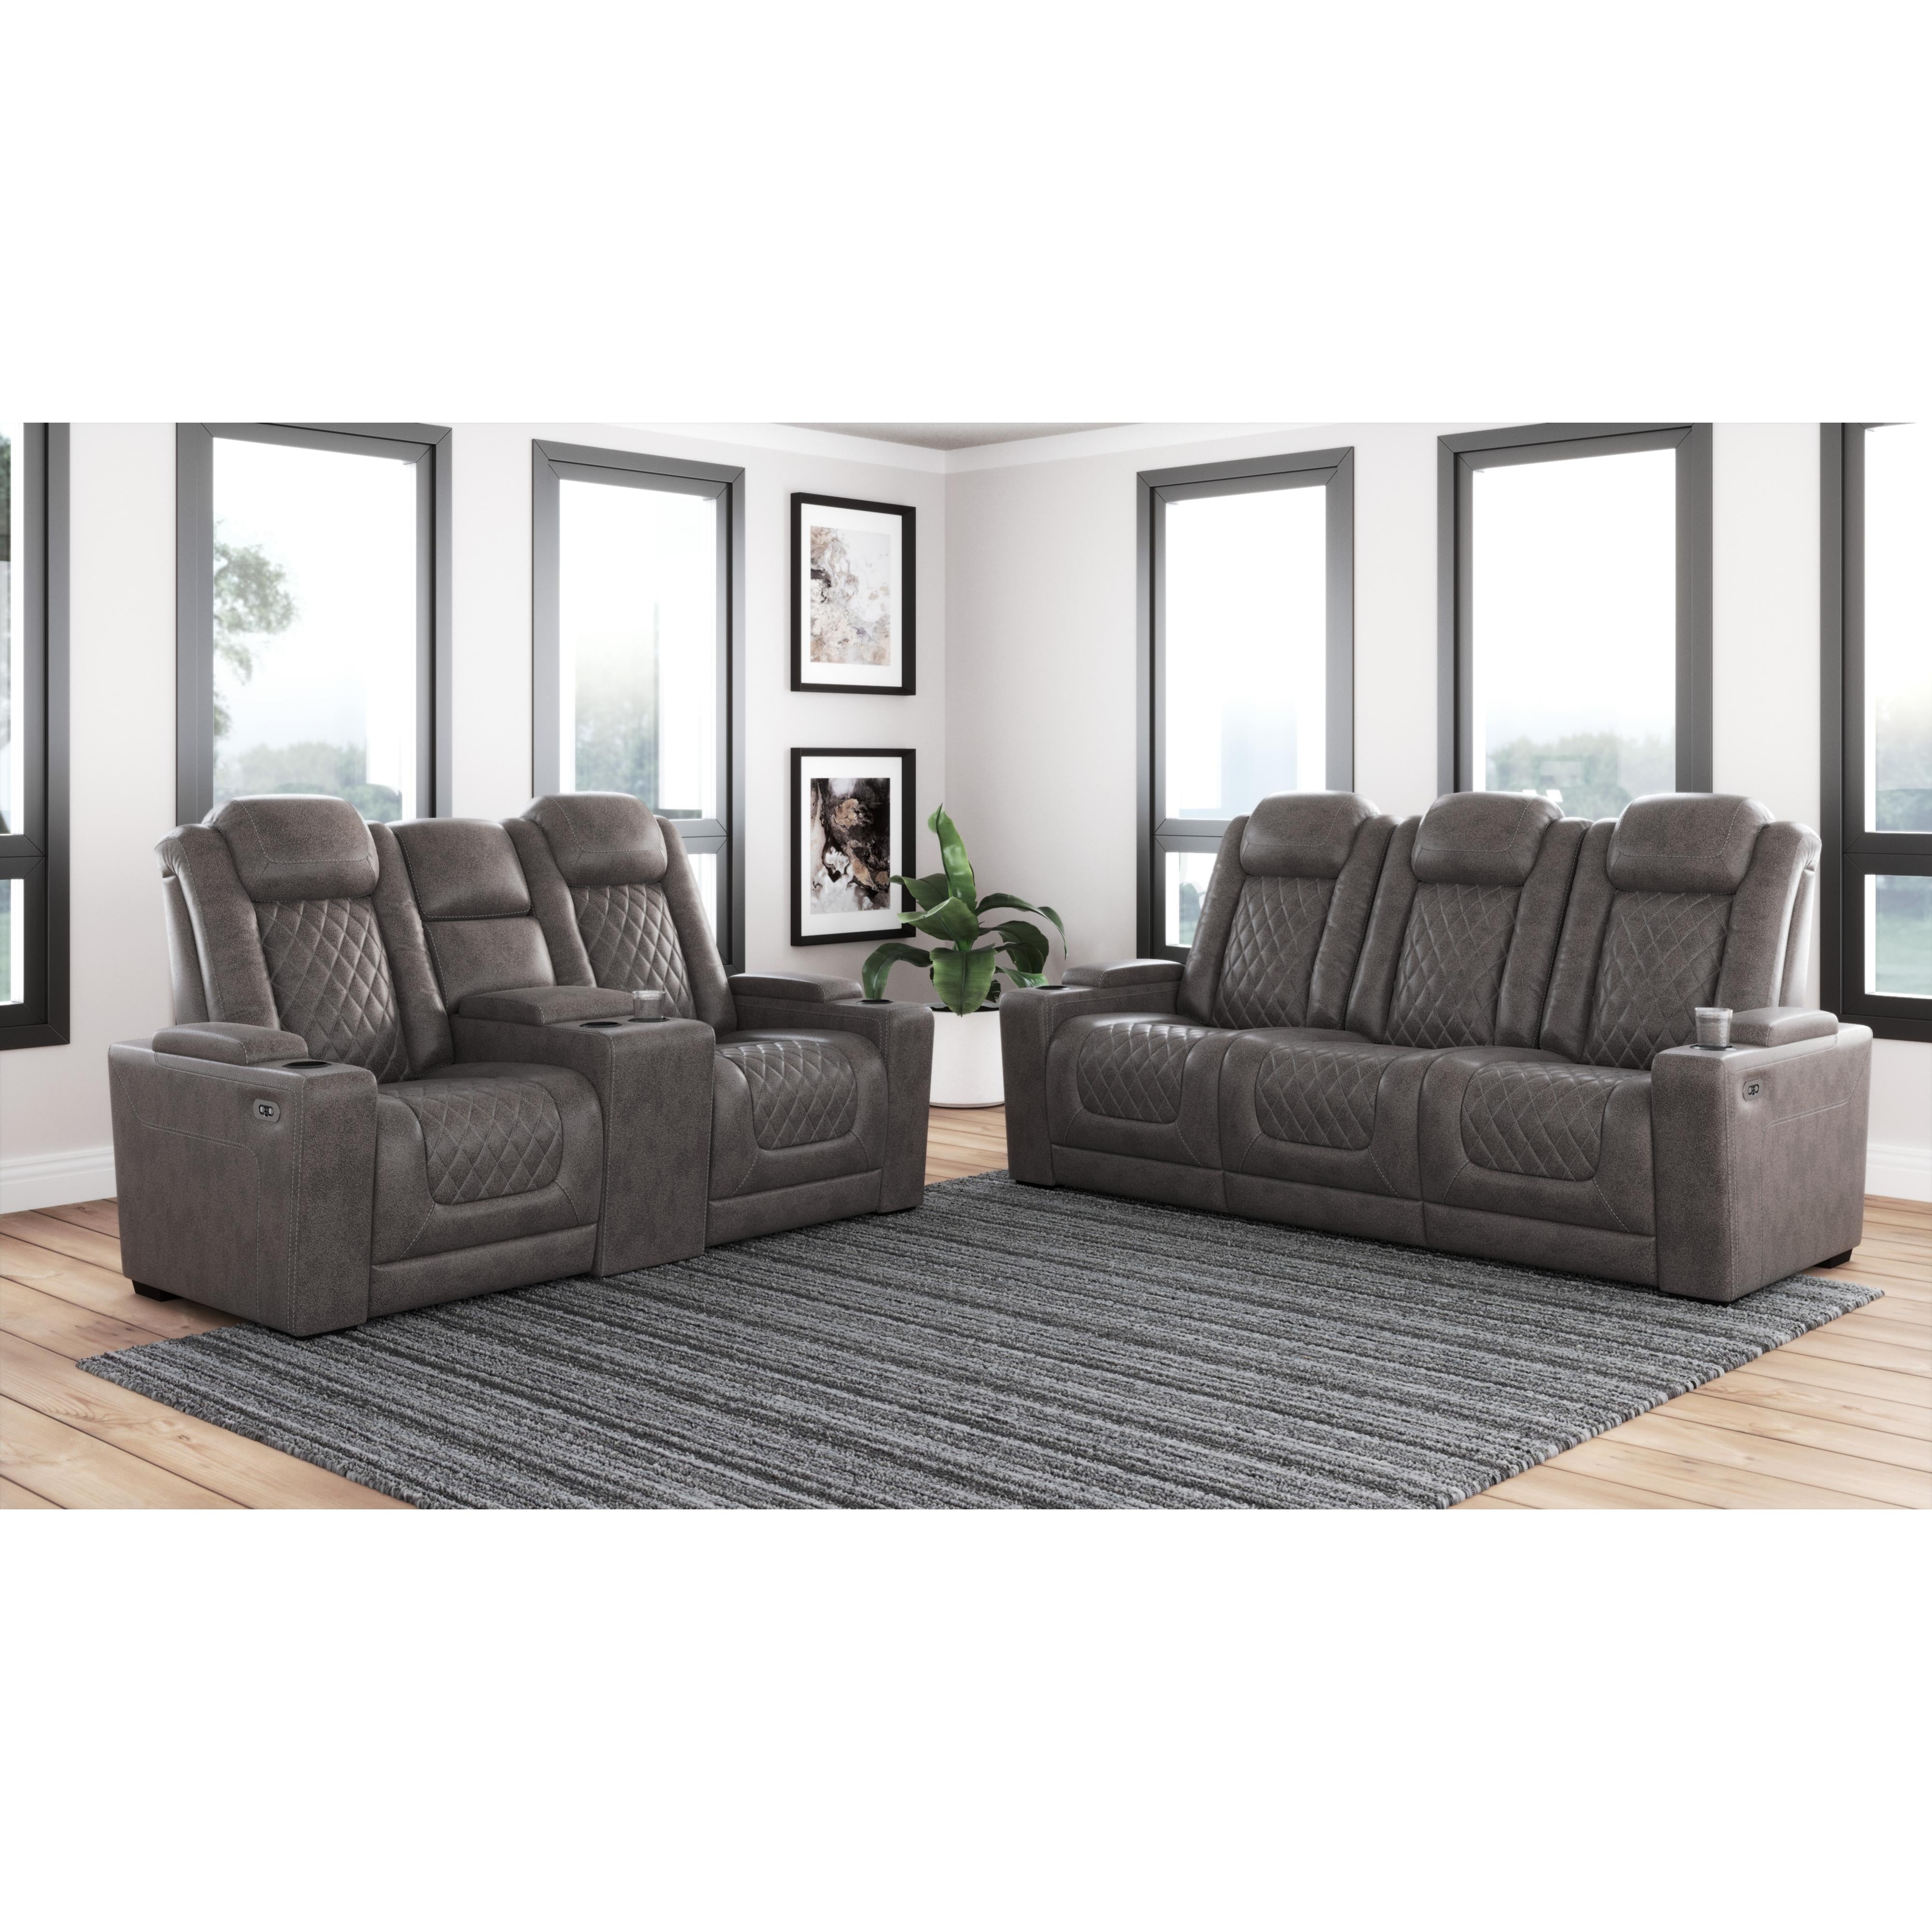 Signature Design by Ashley HyllMont Power Reclining Leather Look Sofa 9300315